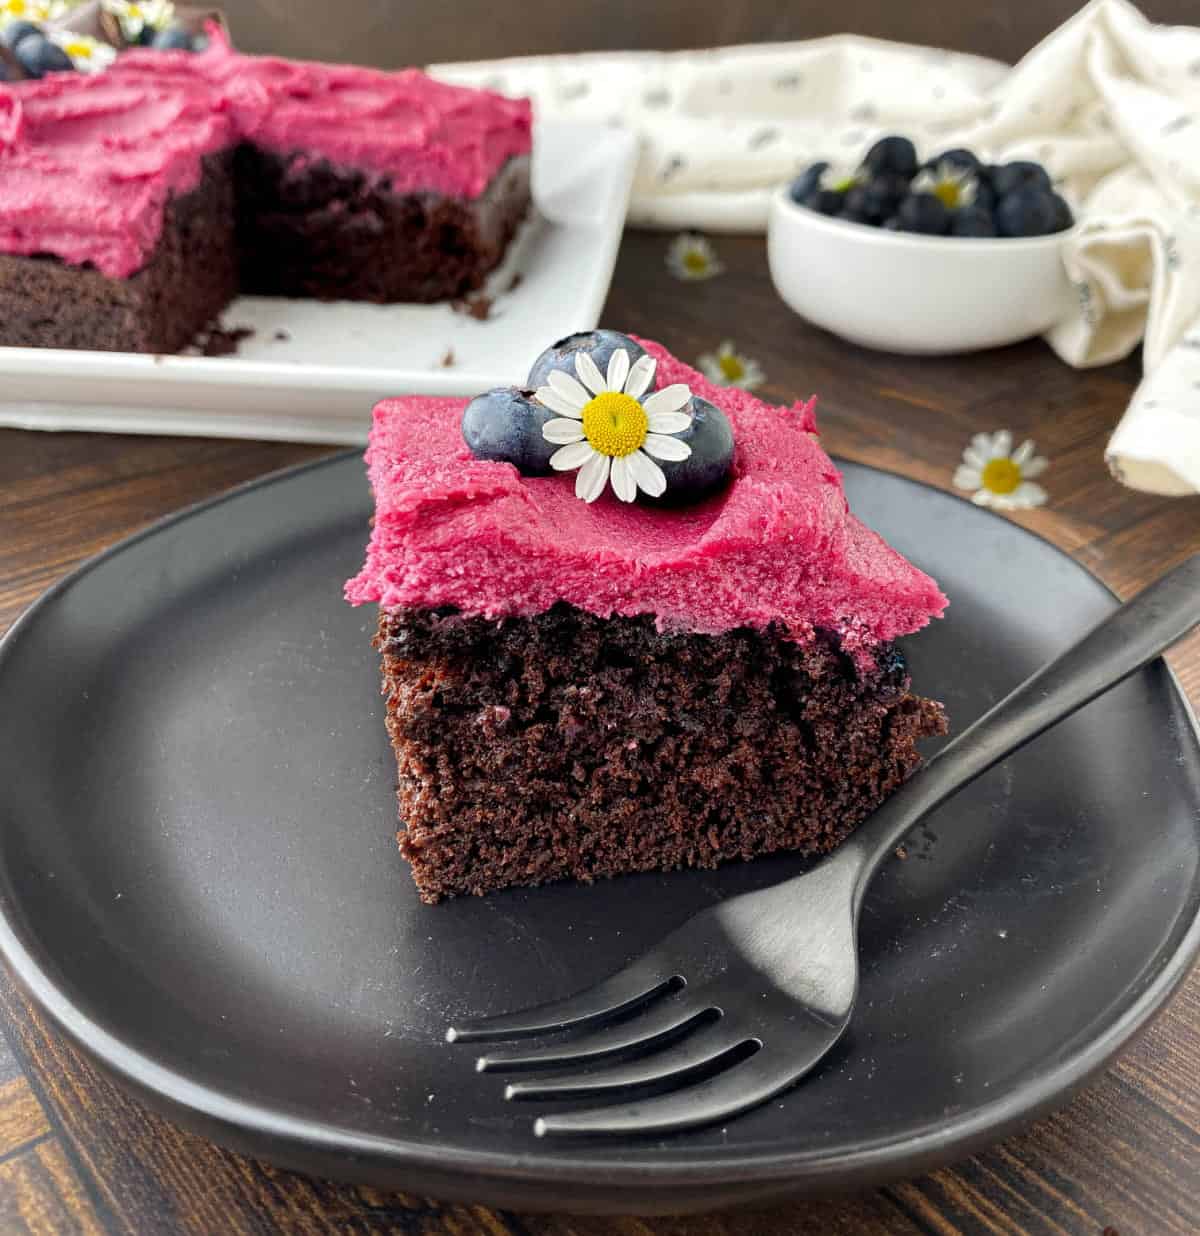 Slice of Blueberry Chocolate Cake on a black plate with fresh blueberries and a chamomile flower on top.